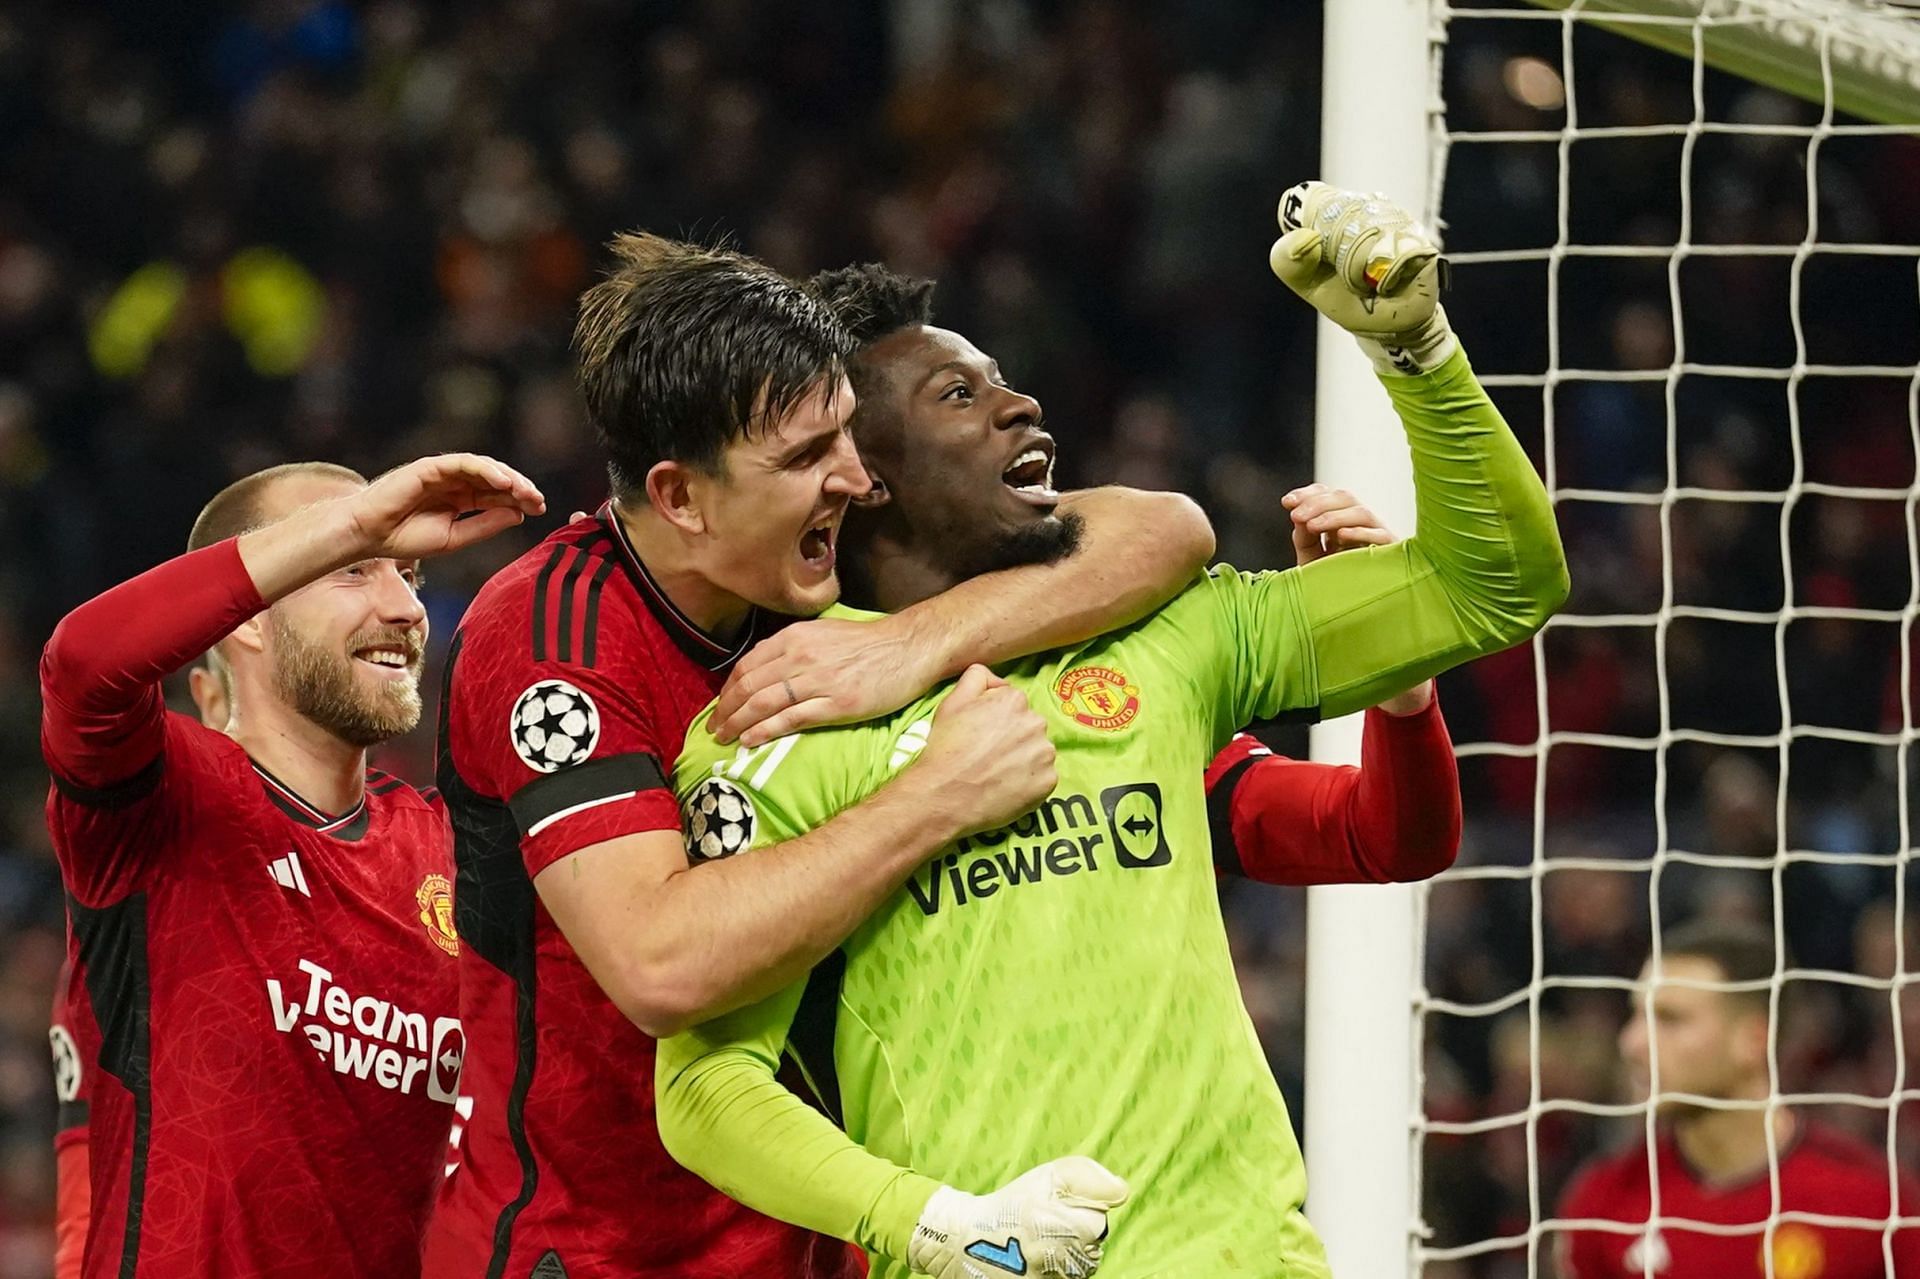 Andre Onana saved a late penalty to help United seal the win.